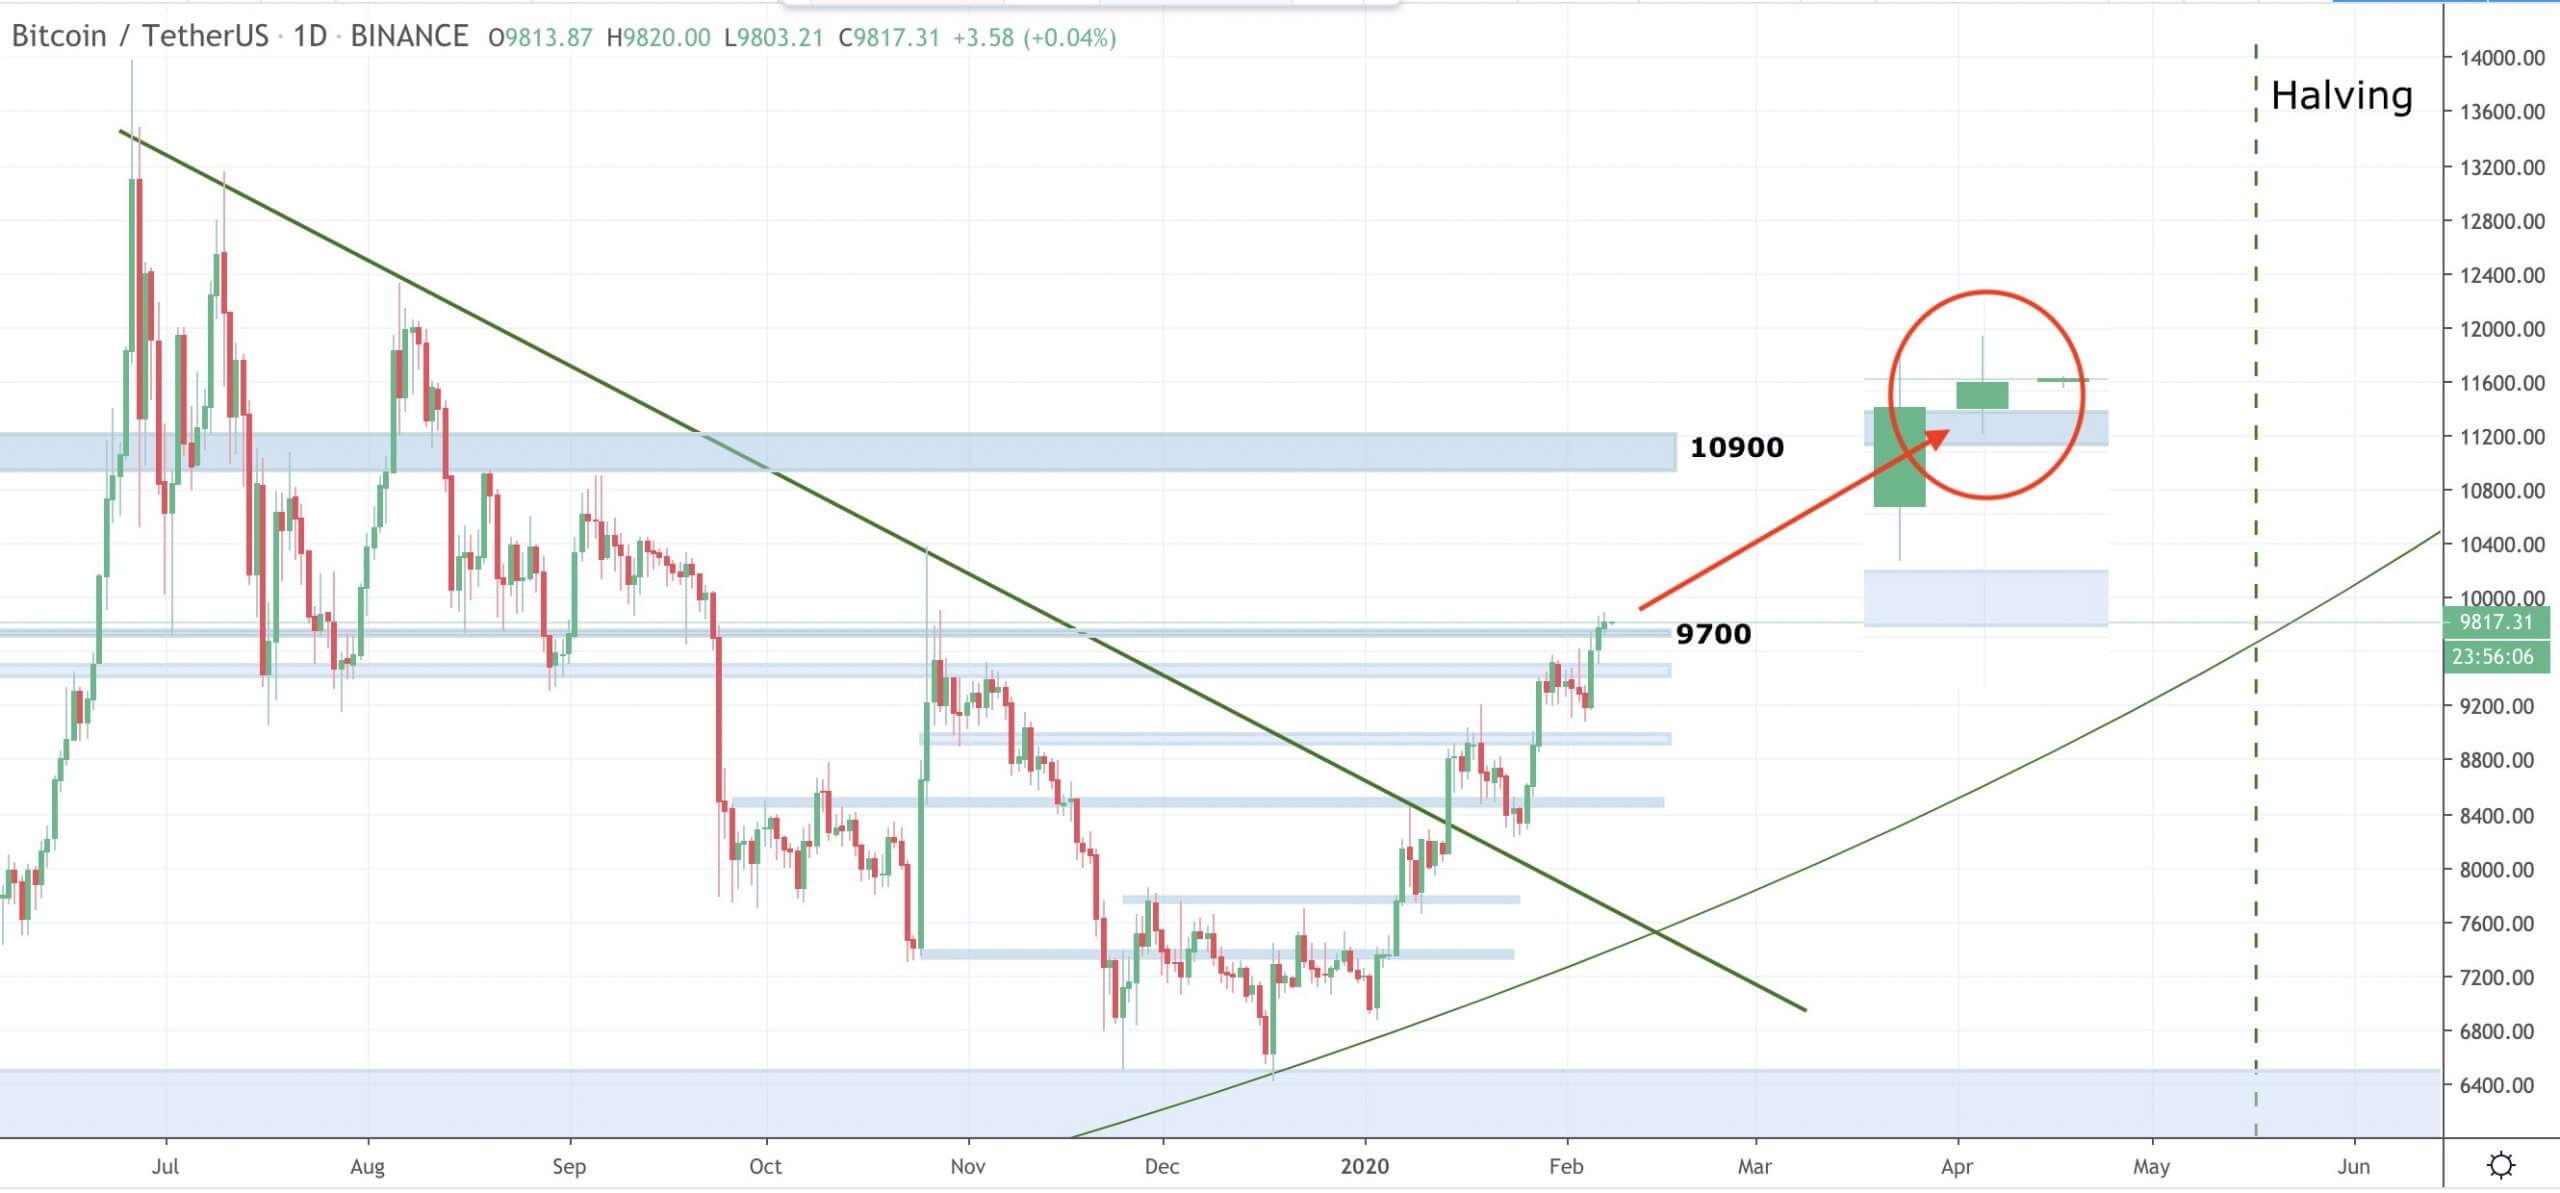 Bitcoin will break its multi-year downward trendline if it closes above this key price